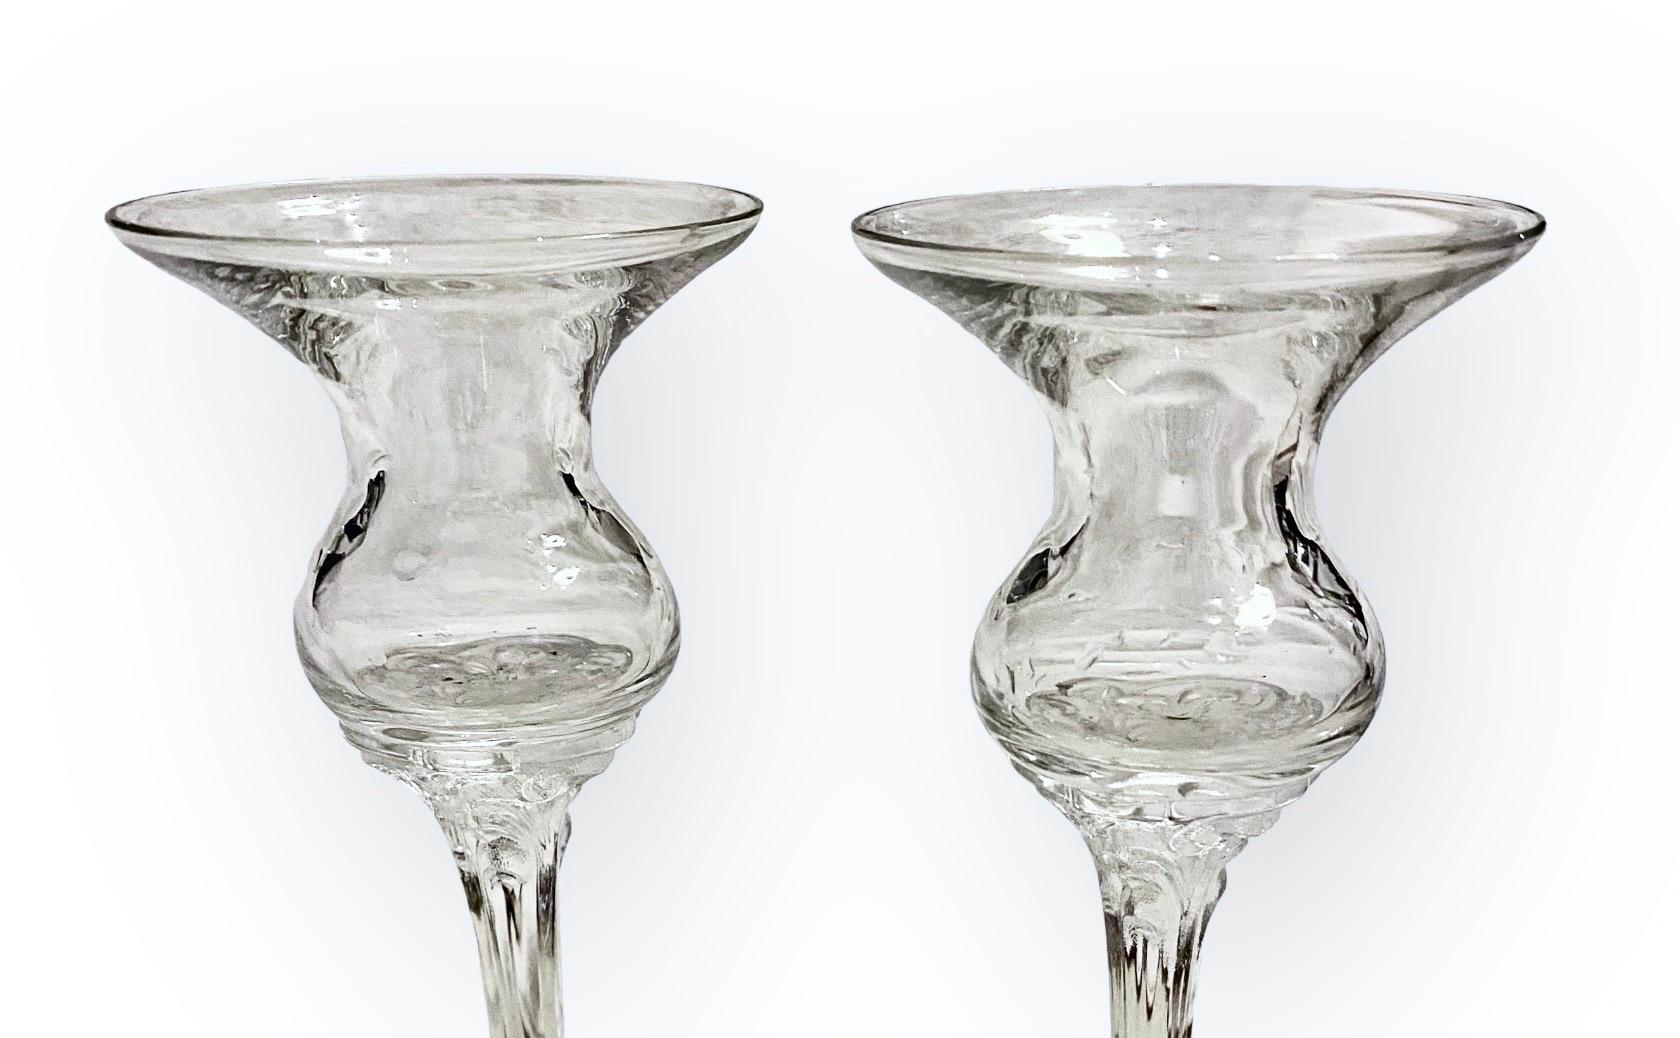 Vintage Rosenthal, Germany crystal classic rose candle holders 6 1/4